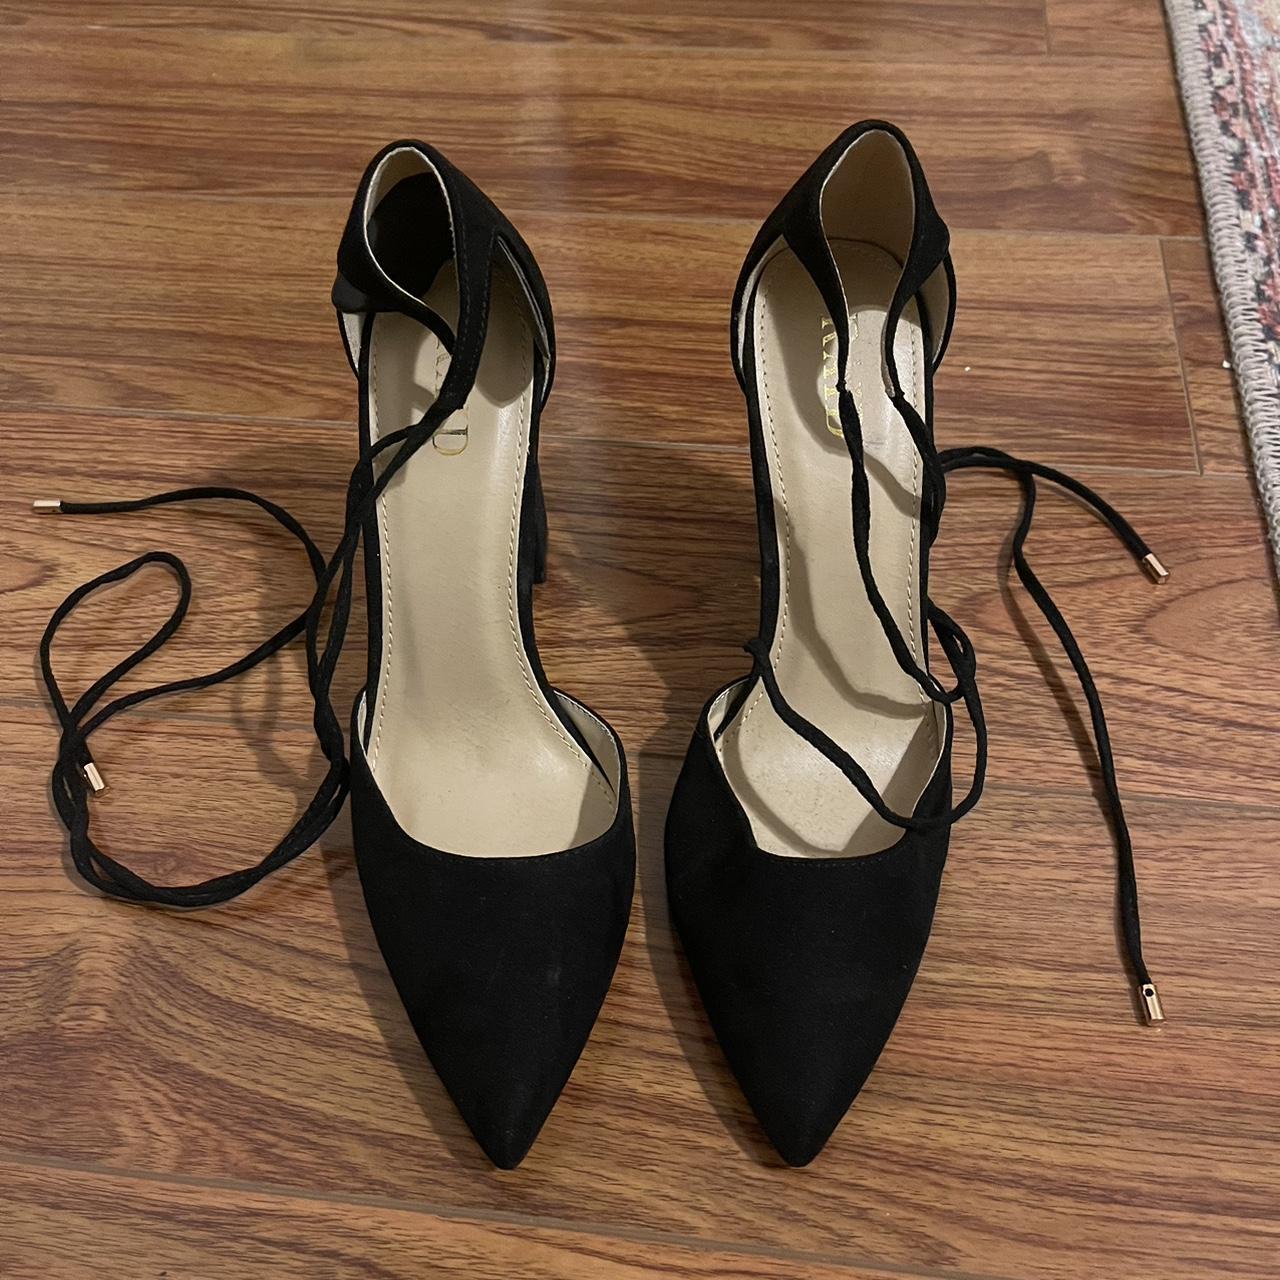 Black 4 inch strappy heels. Perfect for weddings or... - Depop